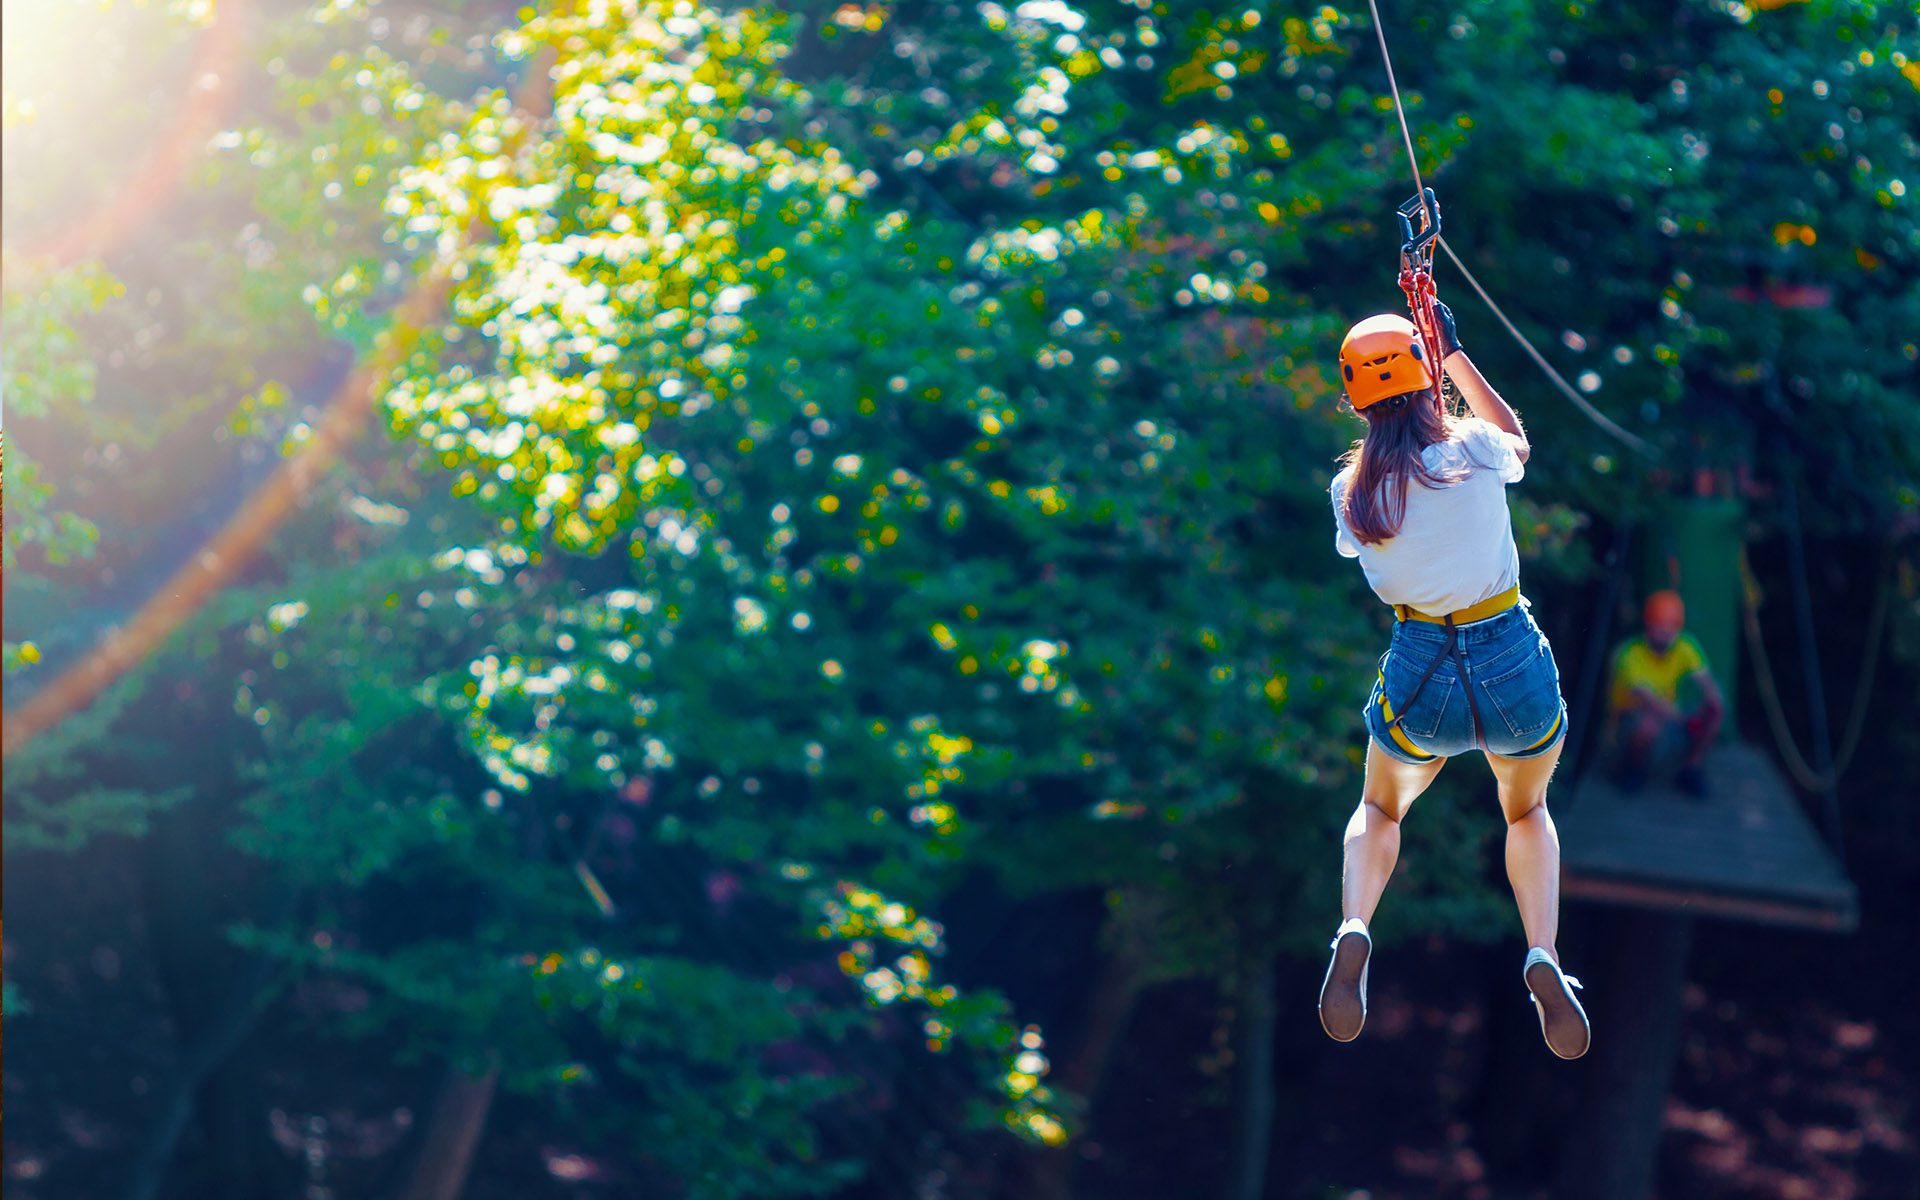 Zipline & Aerial Park Insurance Guide - Woman Ziplining Down to a Wooden Platform with People on a Sunny Day in a Forest